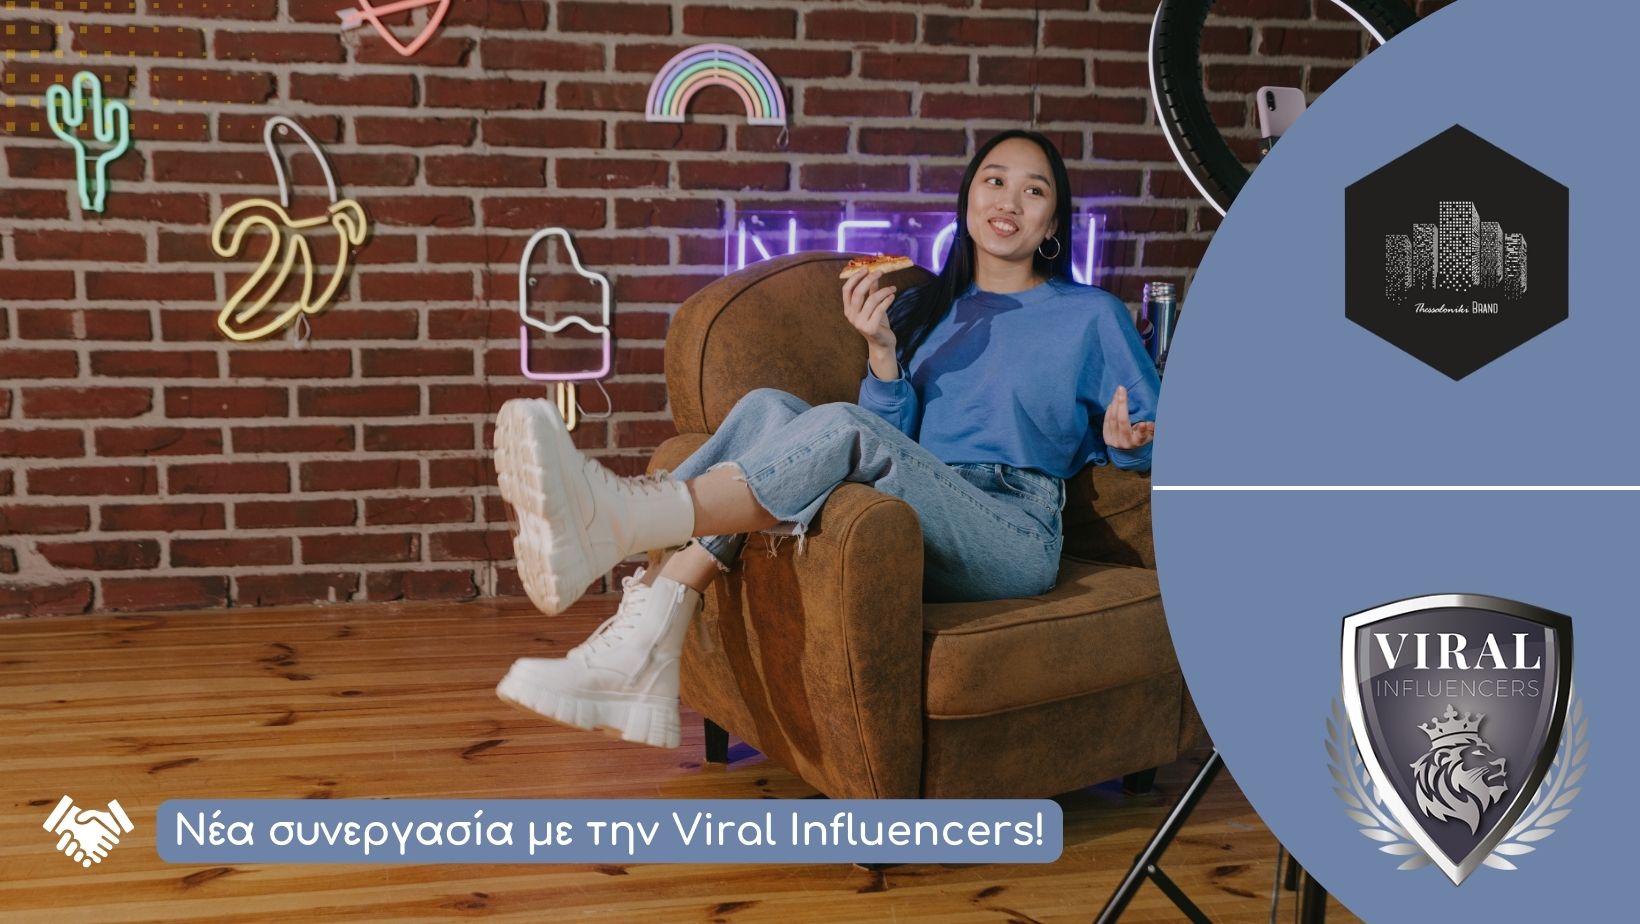 You are currently viewing Νέα συνεργασία της Thessaloniki Brand με την Viral Influencers!